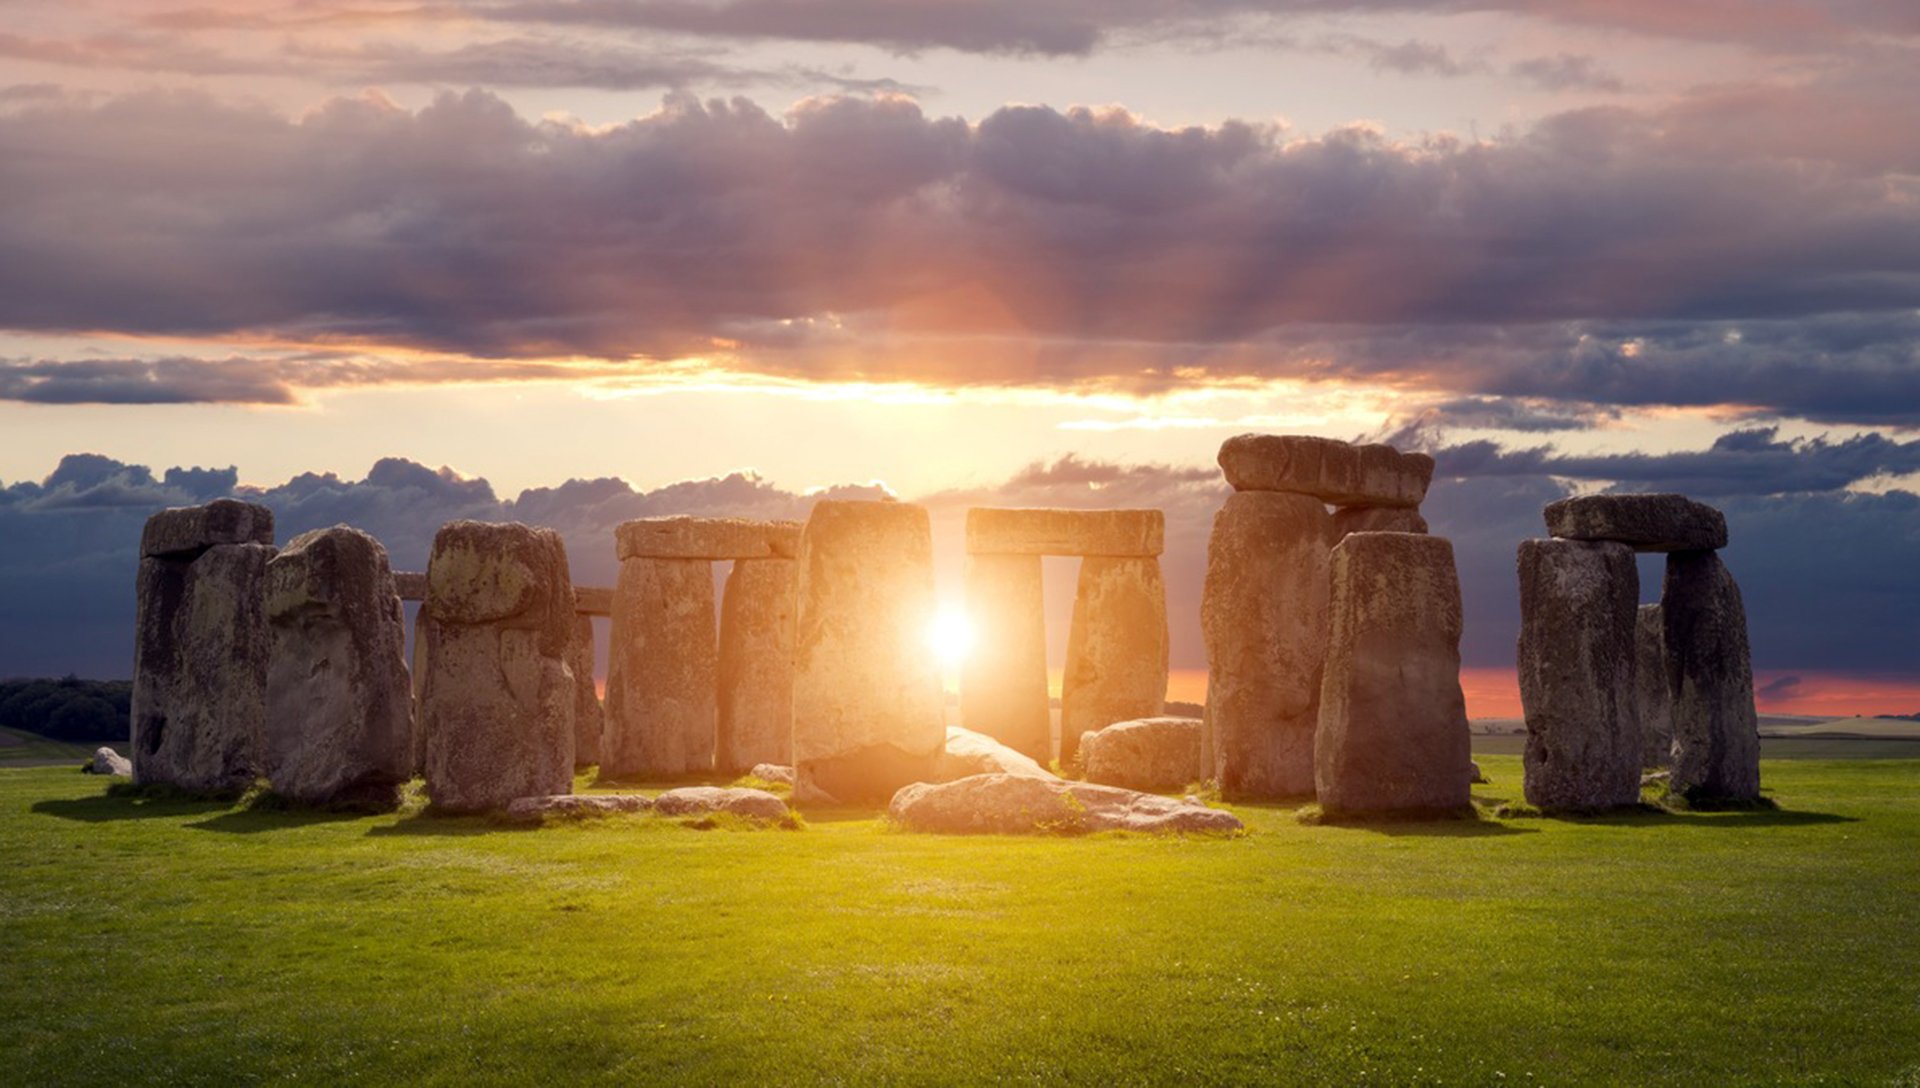 Stonehenge at sunset during the winter solstice, with the iconic stone structures silhouetted against a vibrant sky.